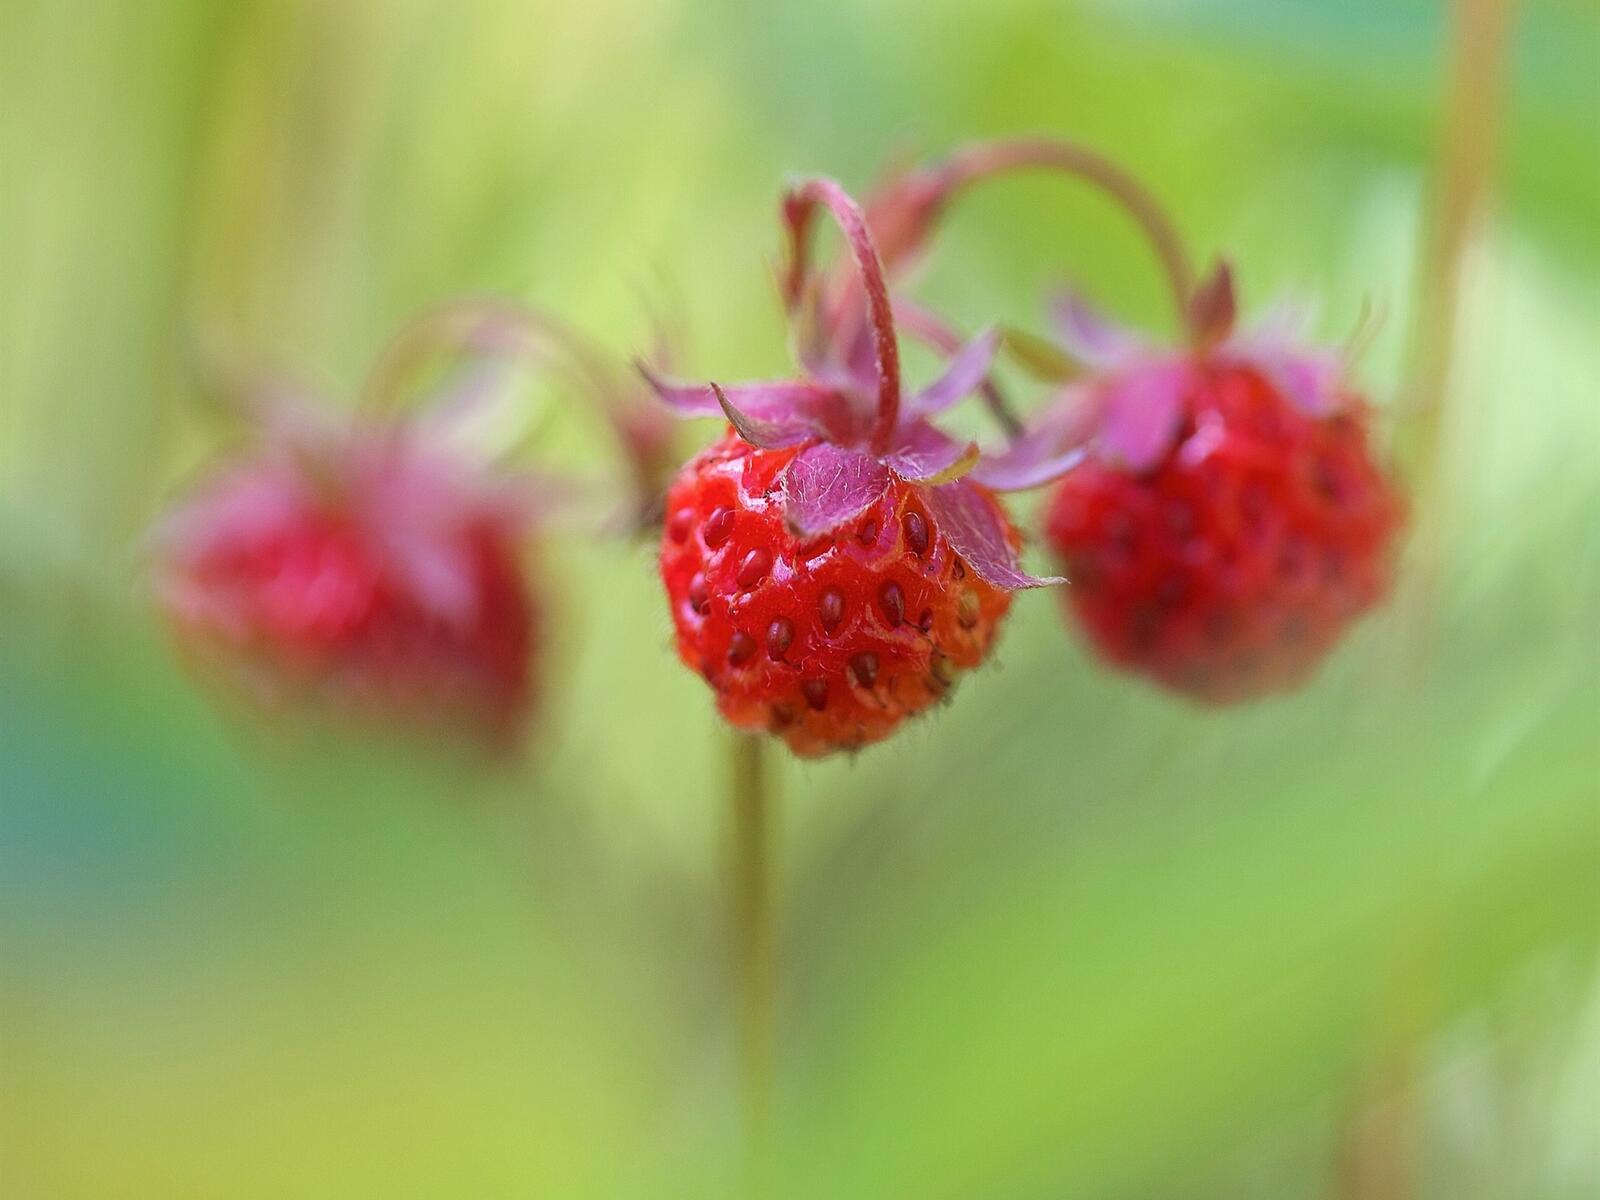 Wallpapers strawberry fruits blurred on the desktop